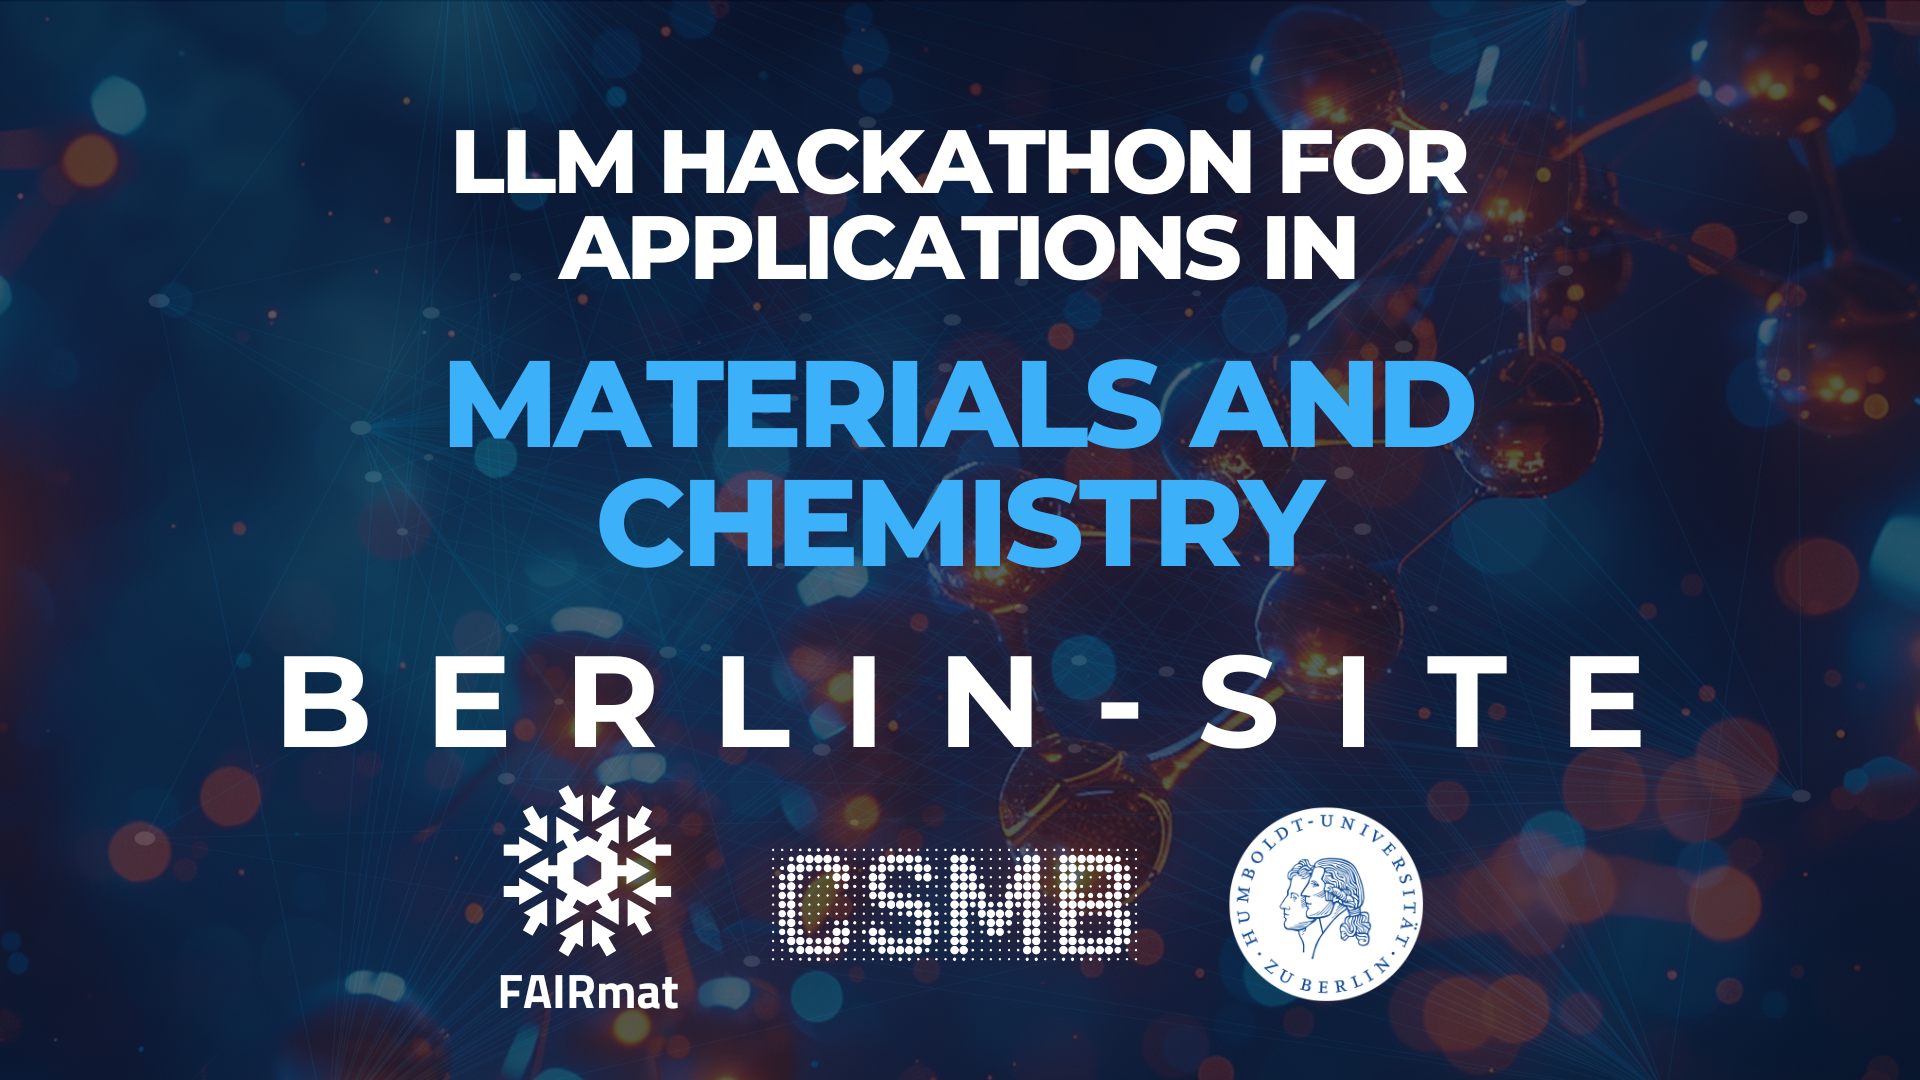 On-site LLM Hackathon for Applications in Materials and Chemistry in Berlin